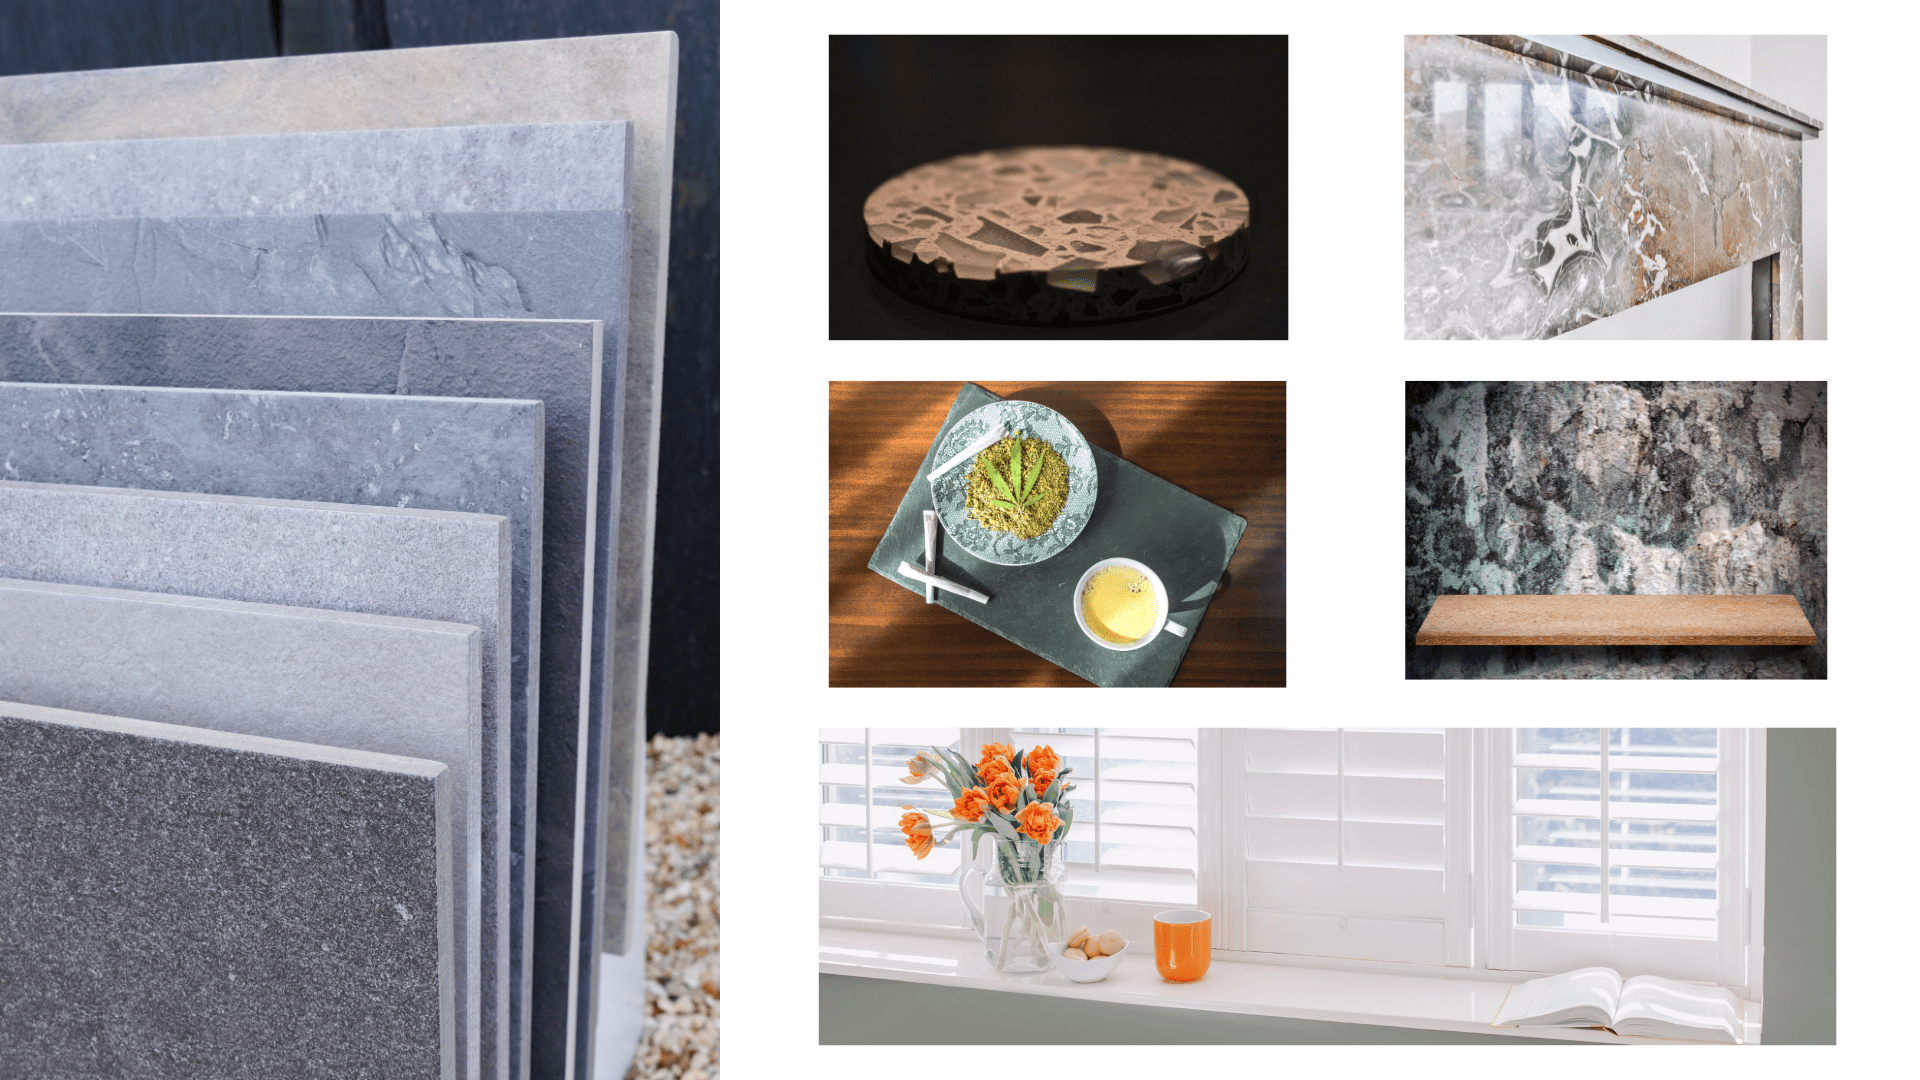 Showing various uses of stone countertop remnants